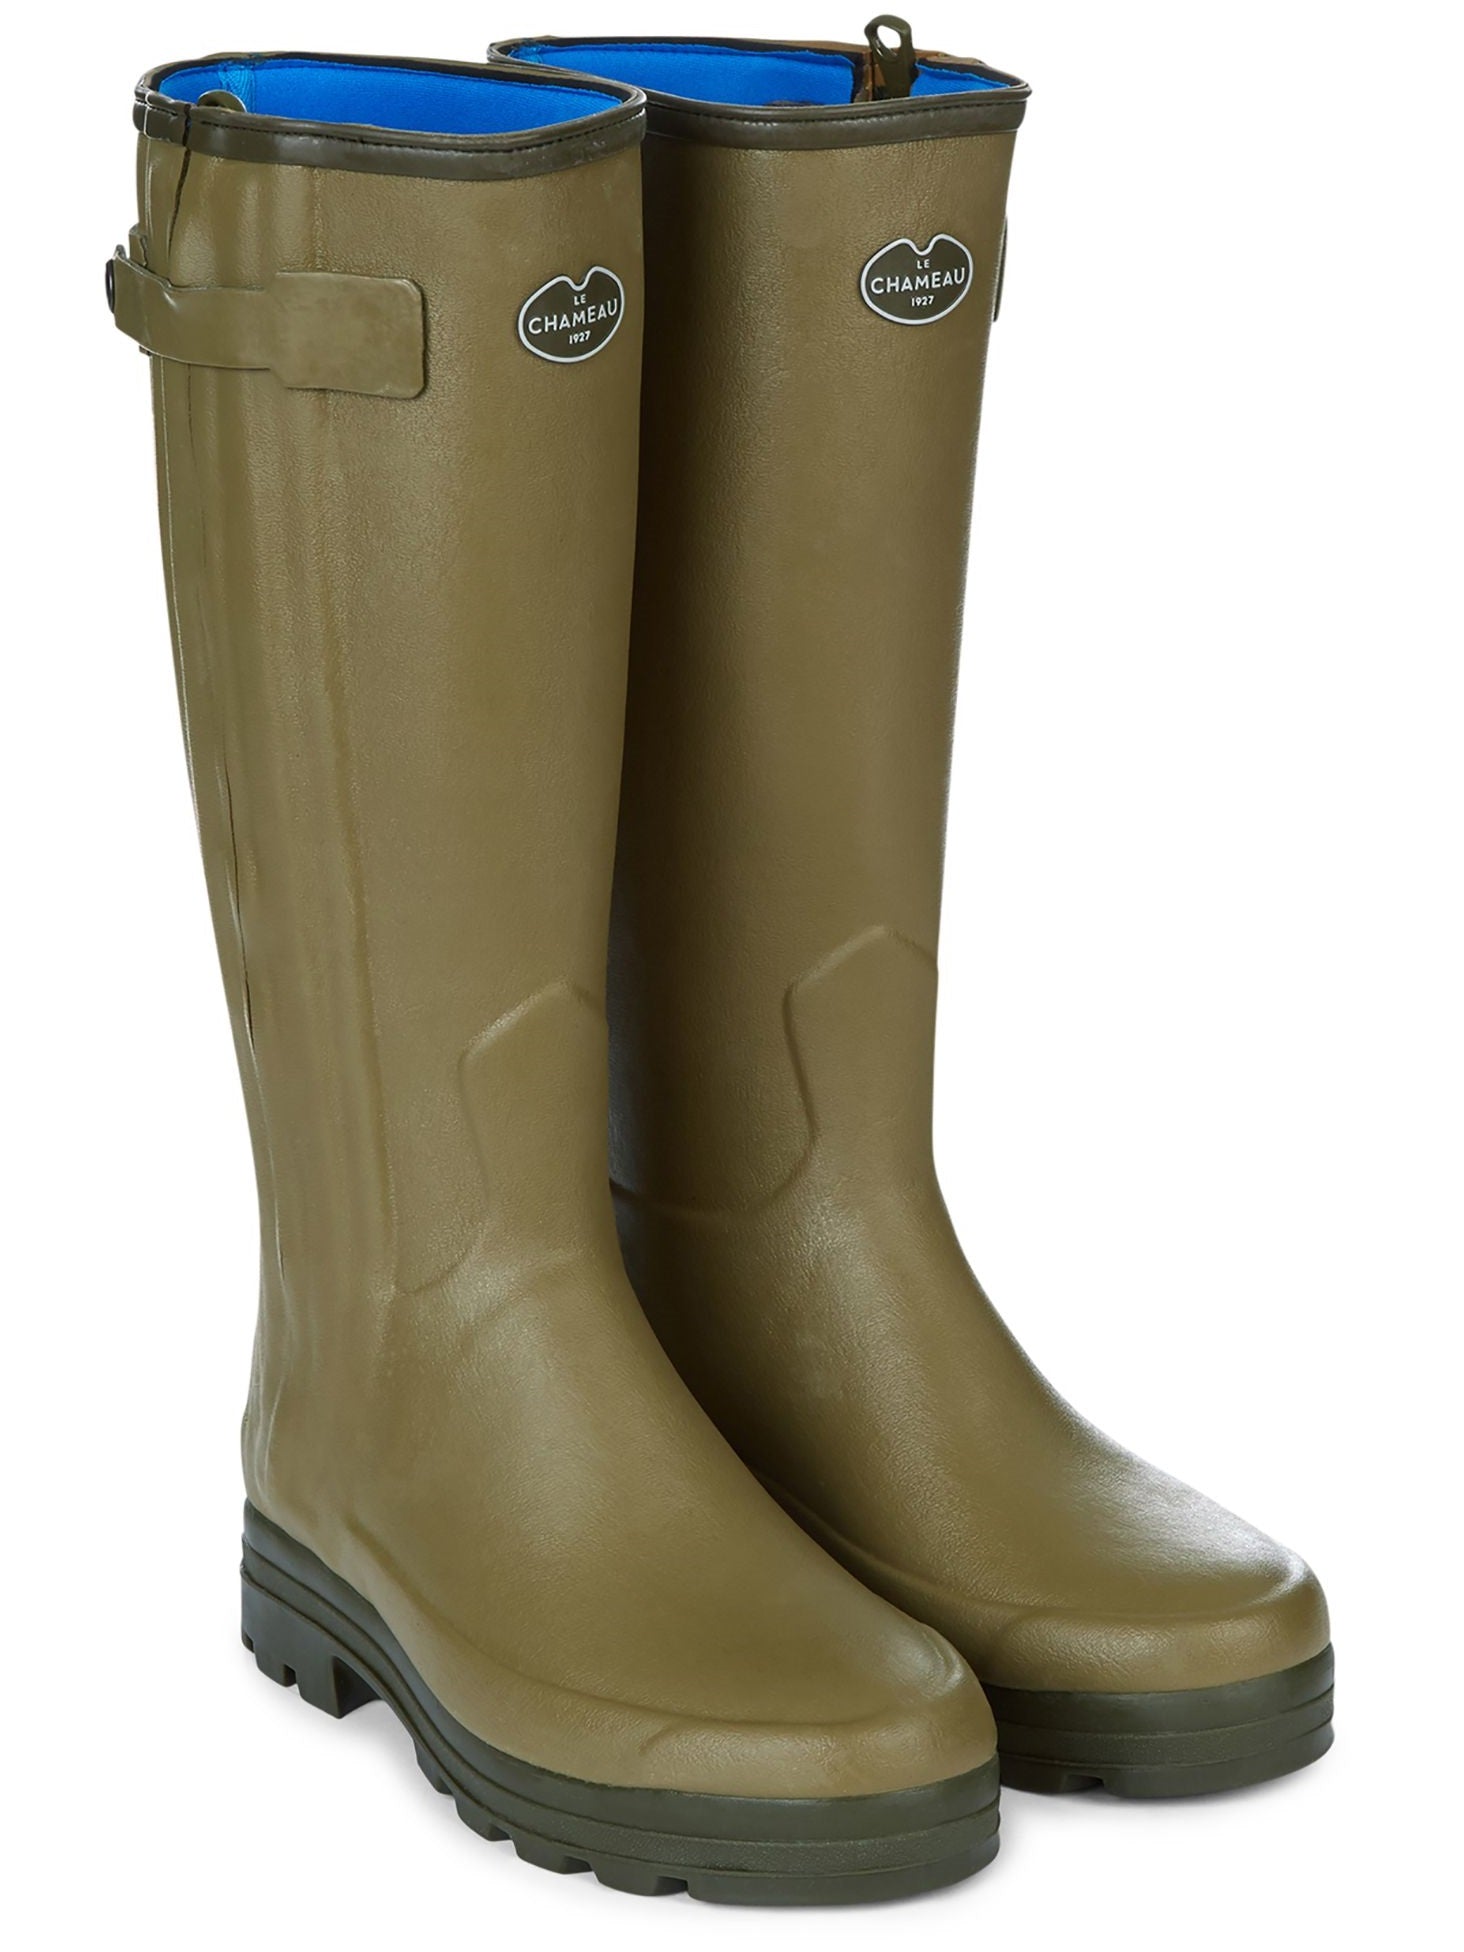 LE CHAMEAU Chasseur Boots - Mens Neoprene Lined Full Zip - Iconic Green